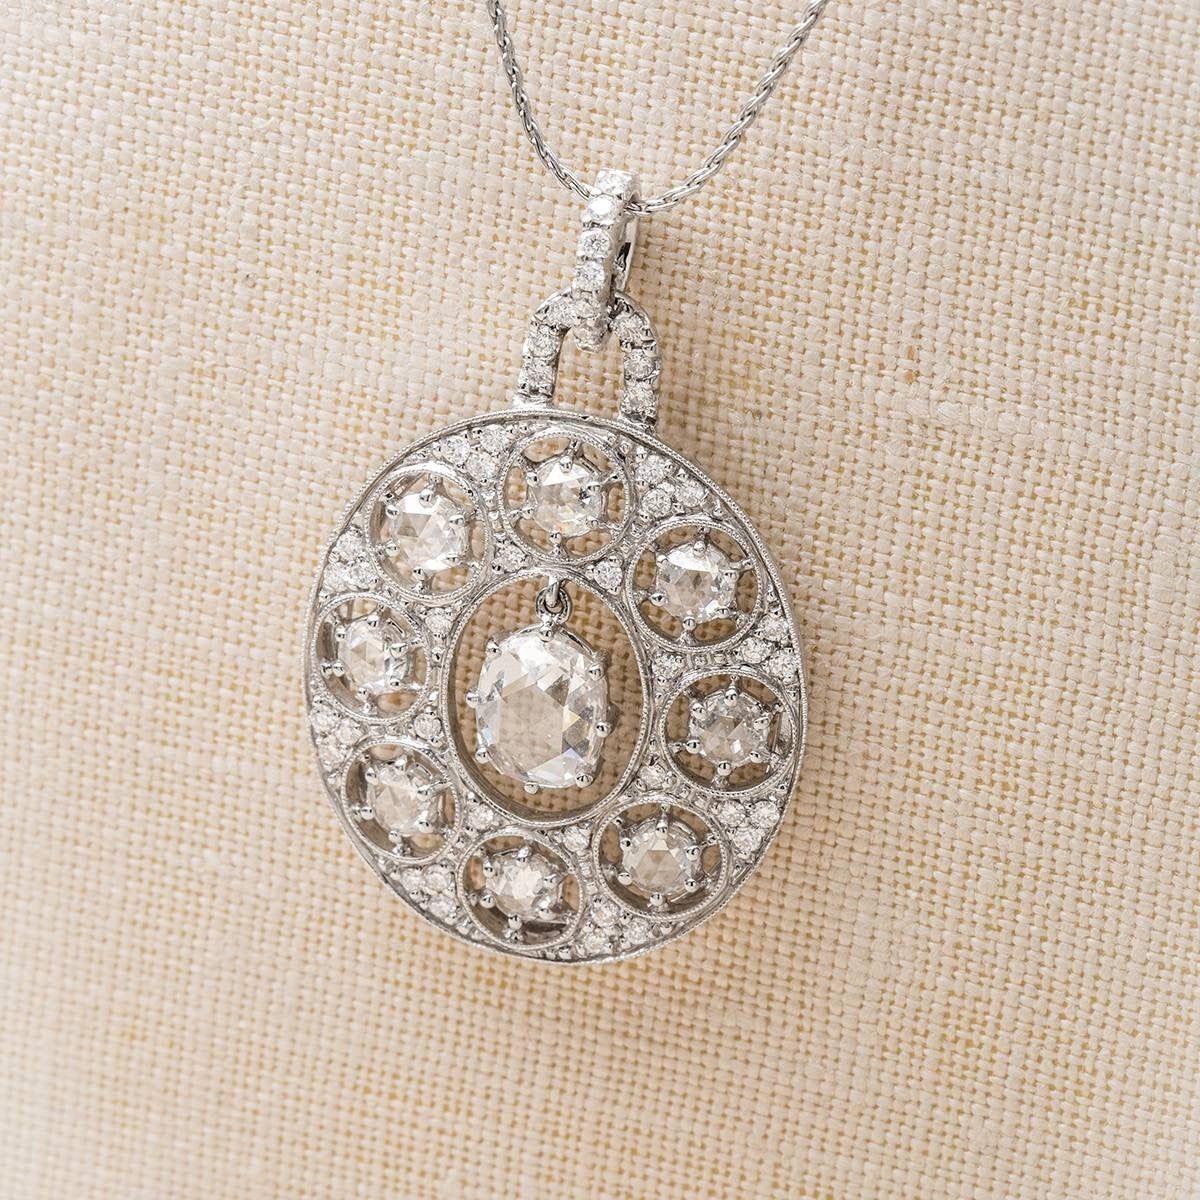 Vintage 18k Gold And Rose Cut Diamond Pendant Within Most Current Round Brilliant Diamond Straightline Necklaces (View 17 of 25)